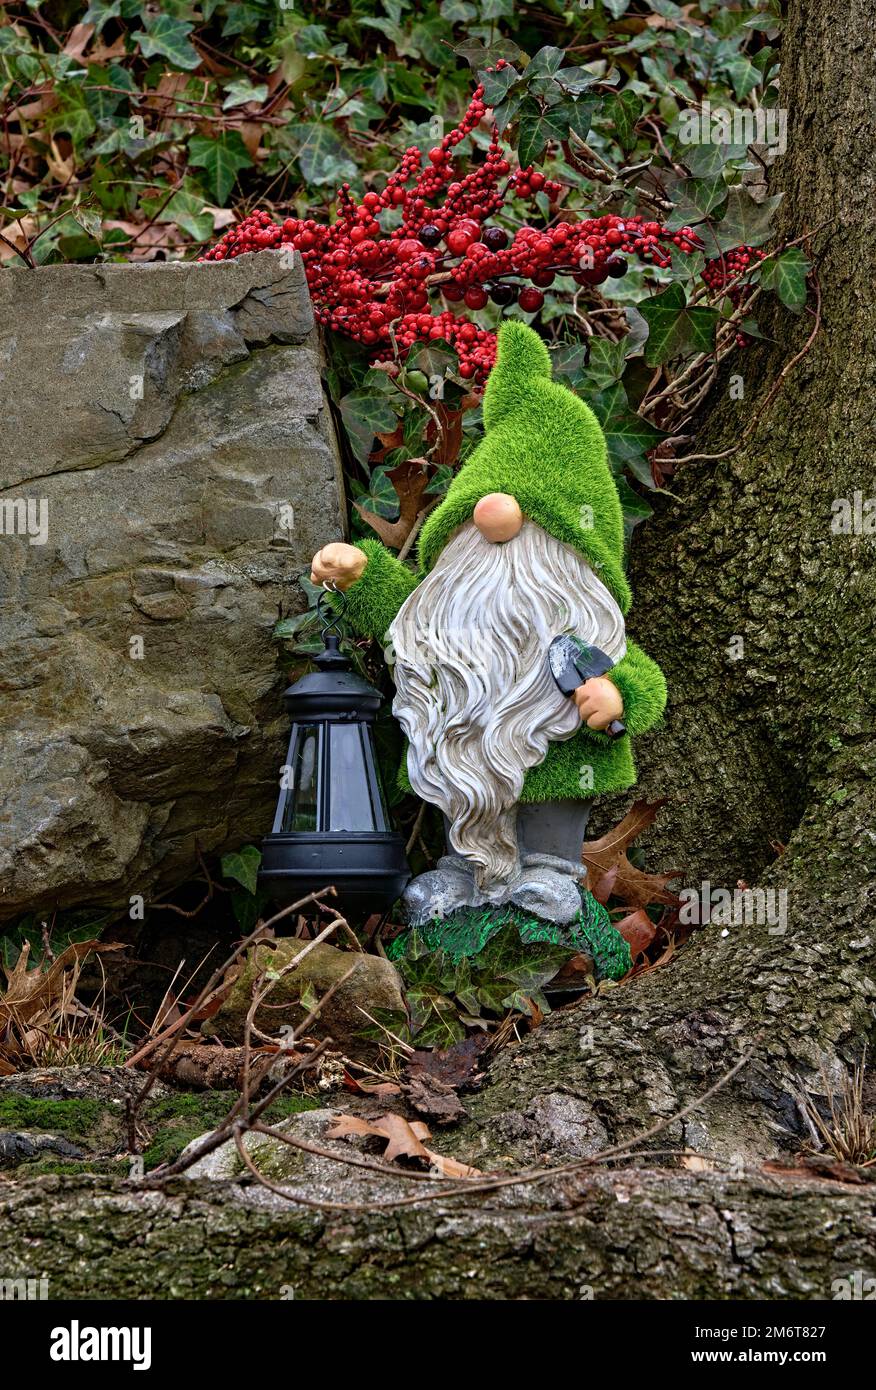 A cute little garden Gnome. With a magic lantern,green hair and a small shovel. With some red berries in the background. Stock Photo